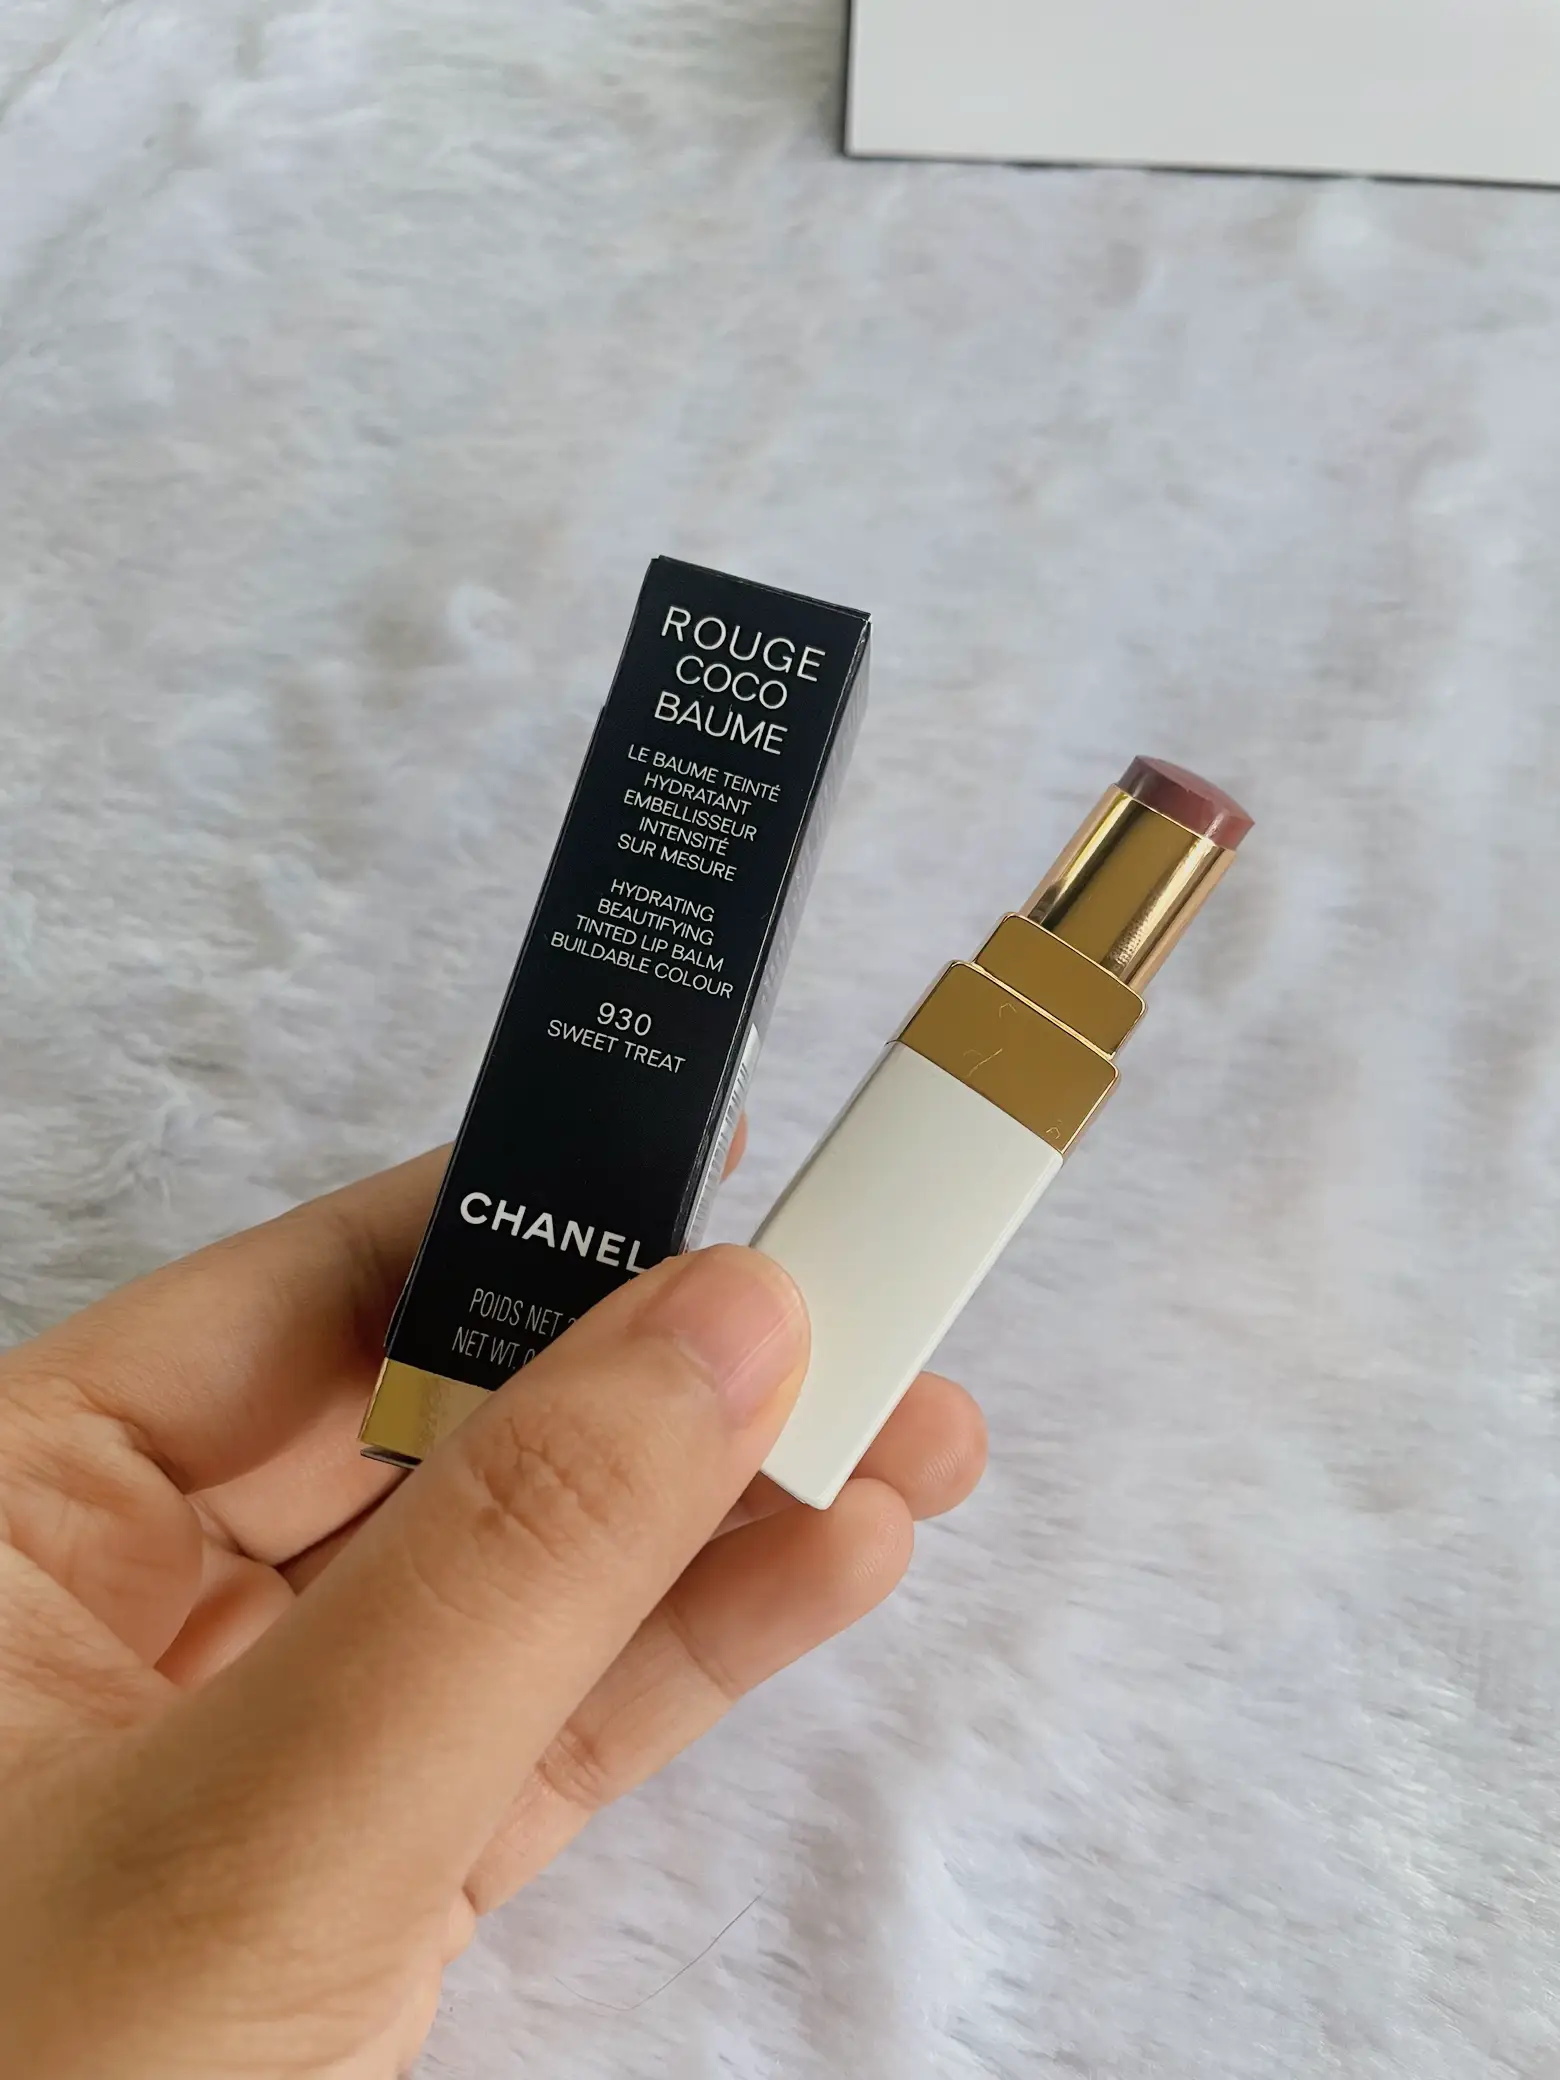 Chanel Rouge Coco Baume Hydrating Conditioning Lip Balm 0.1 oz Lip